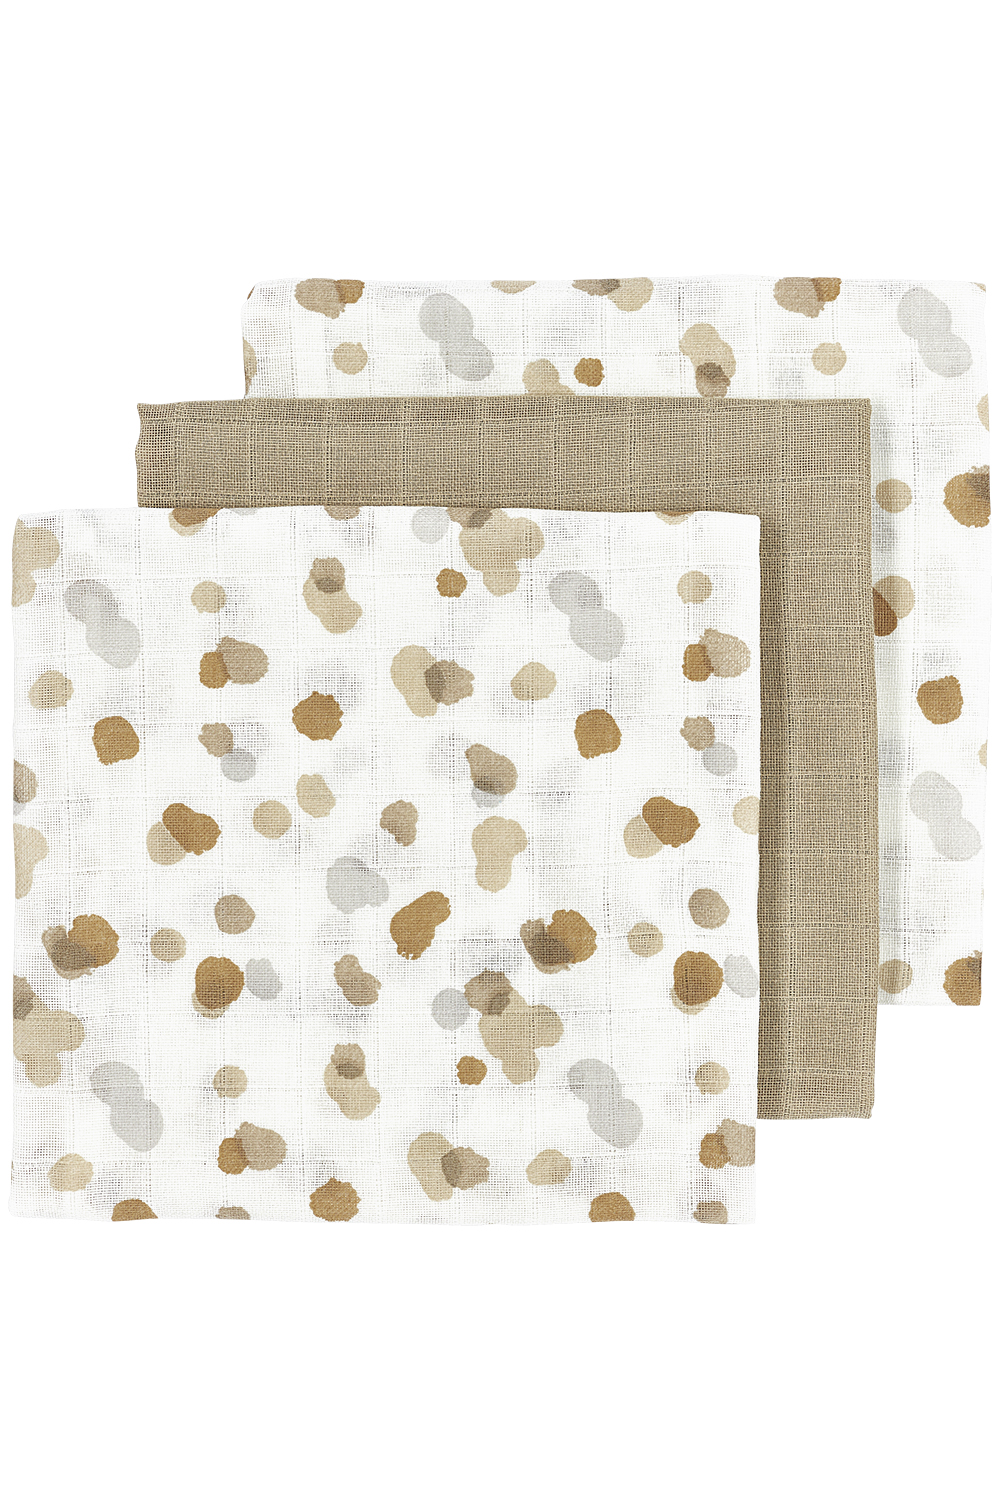 Musselin Mullwindeln 3er pack Stains - sand - 70x70cm